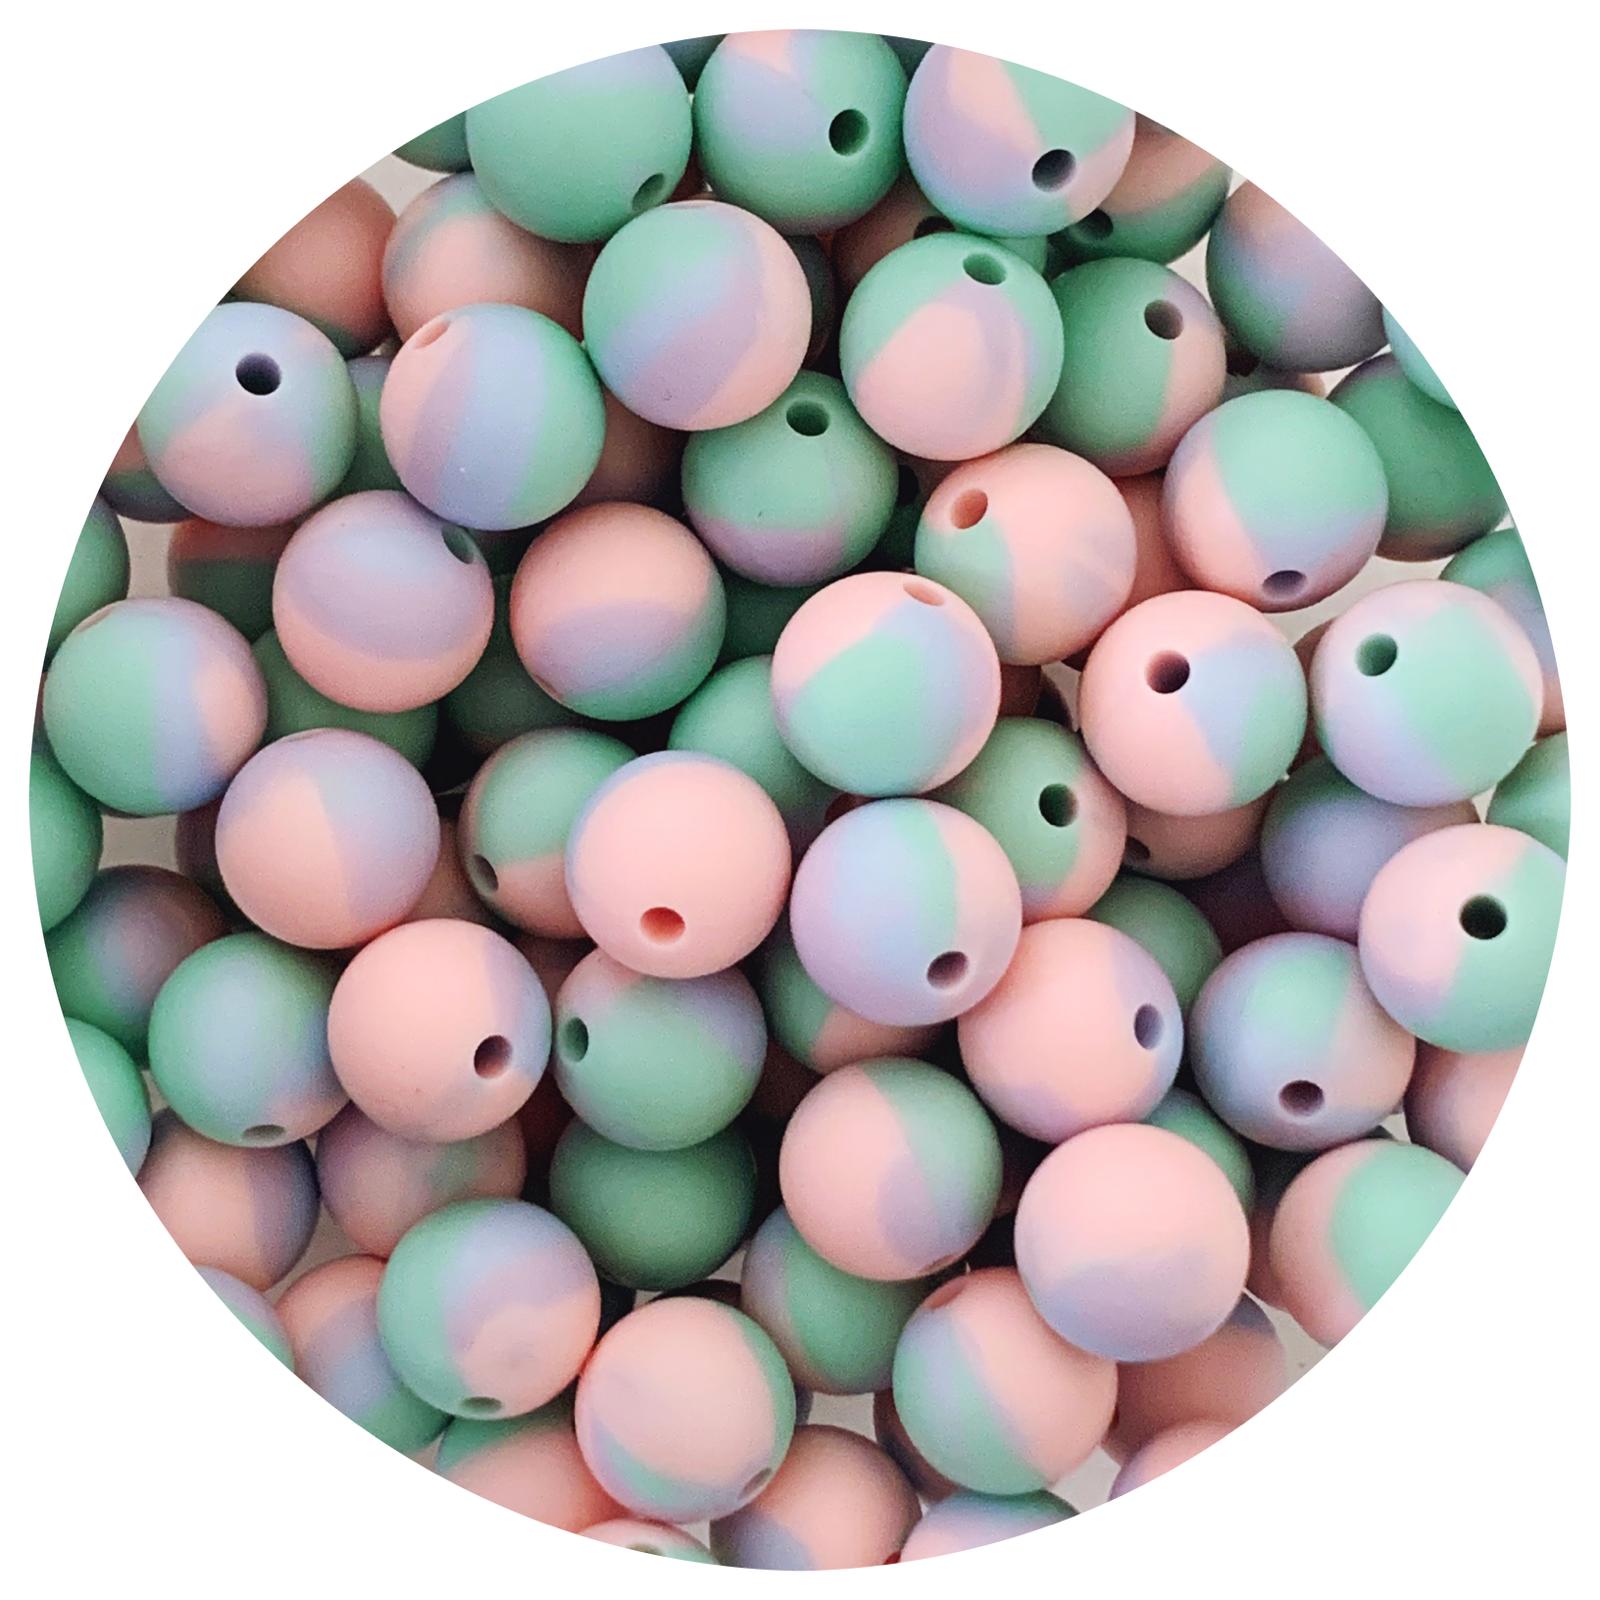 Pastel Tie Dye - 12mm Round Silicone Beads - 10 beads